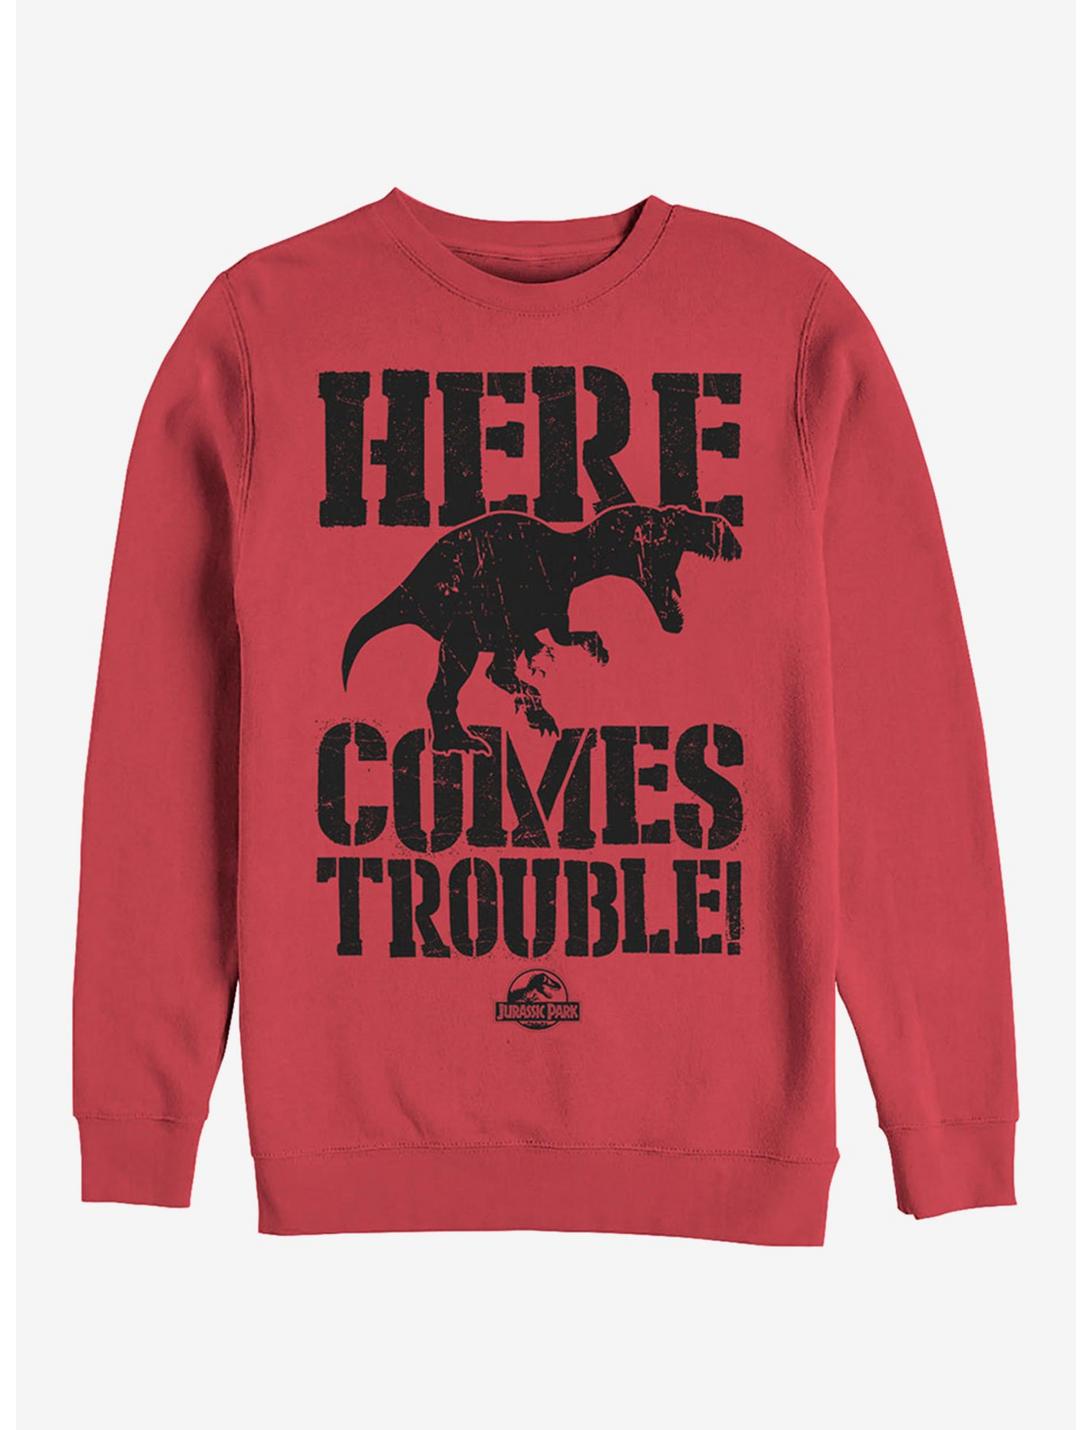 Here Comes Trouble Sweatshirt, RED, hi-res